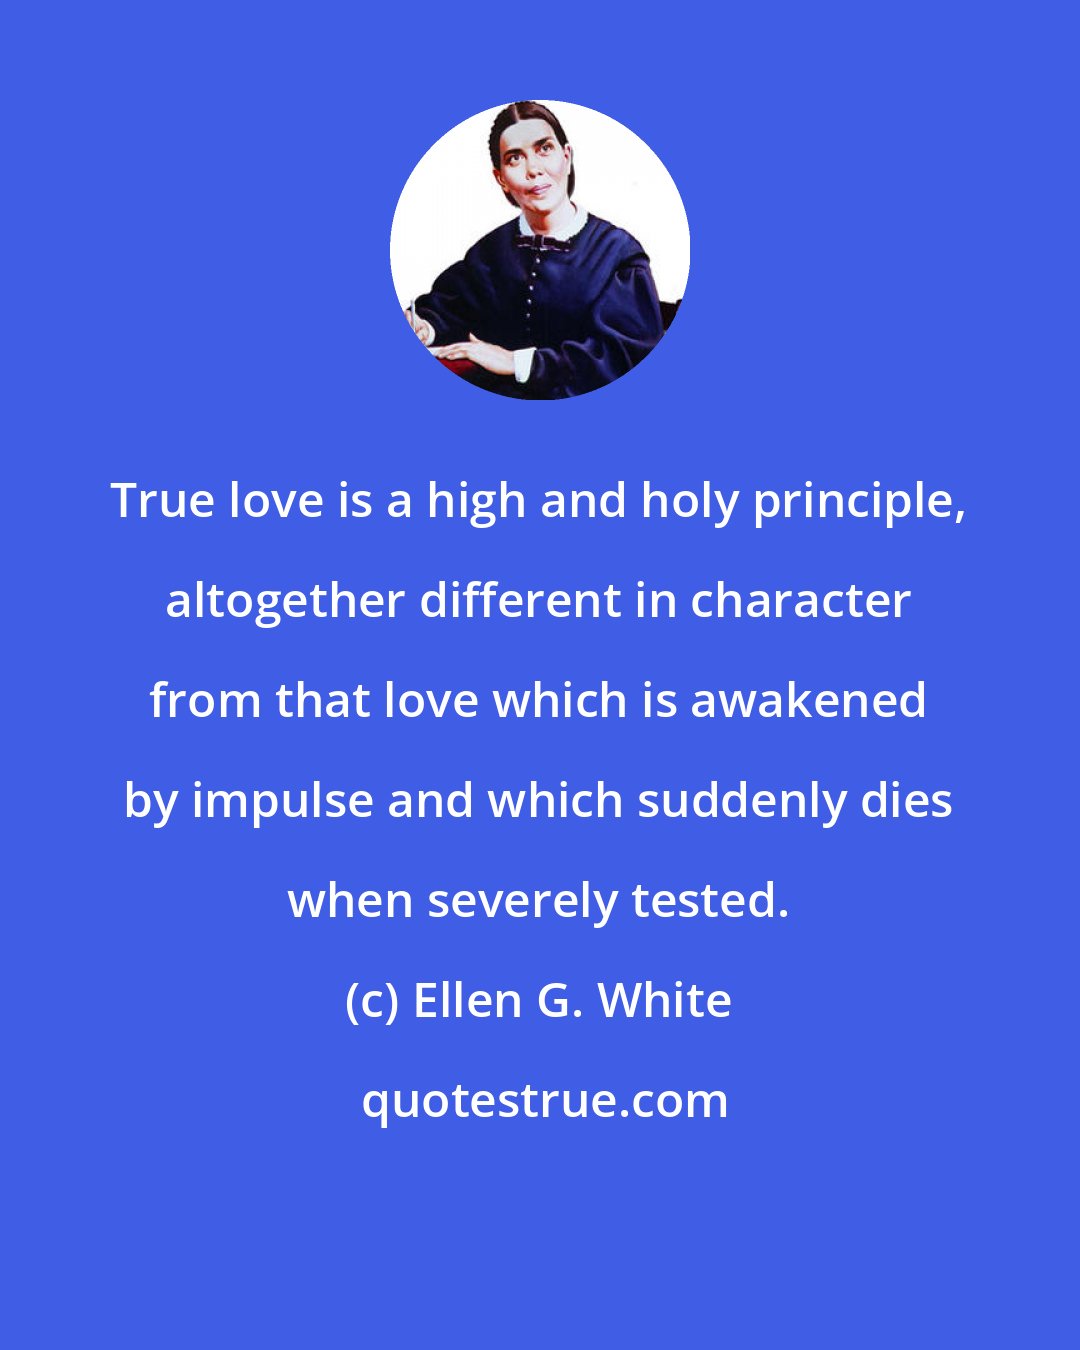 Ellen G. White: True love is a high and holy principle, altogether different in character from that love which is awakened by impulse and which suddenly dies when severely tested.